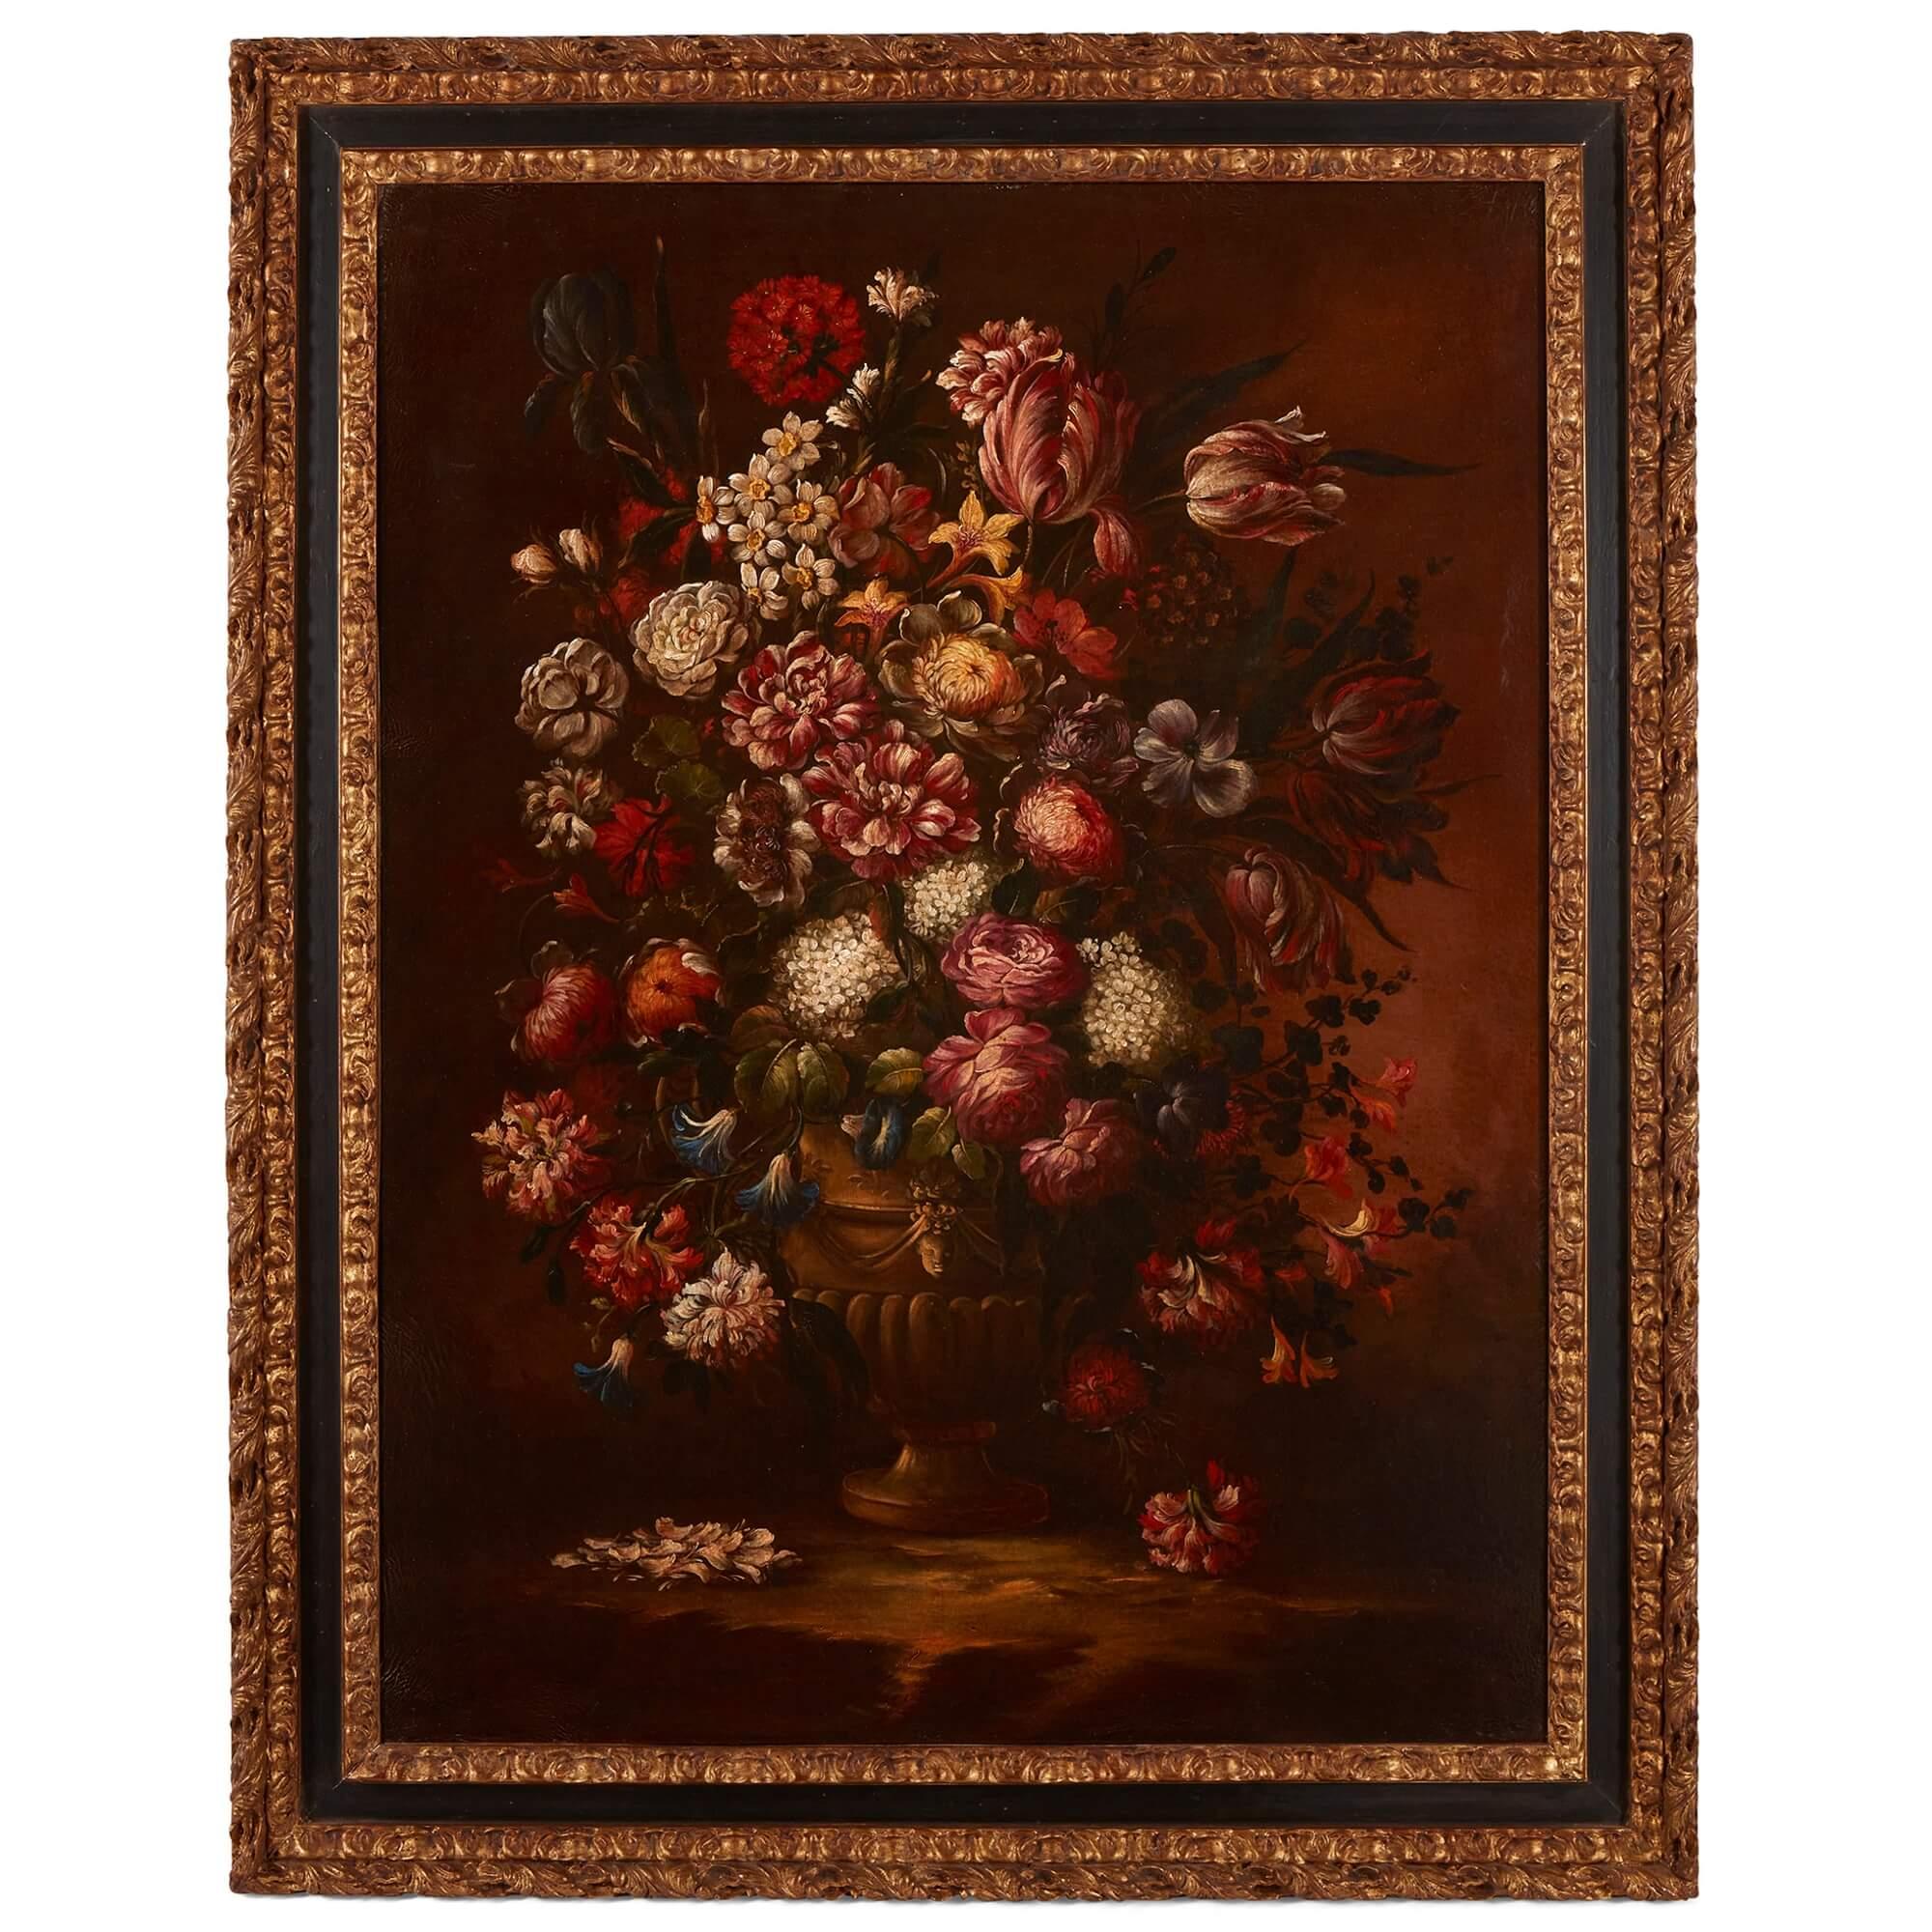 Pair of Large Floral Still Lifes in the Old Master Style  - Painting by Unknown